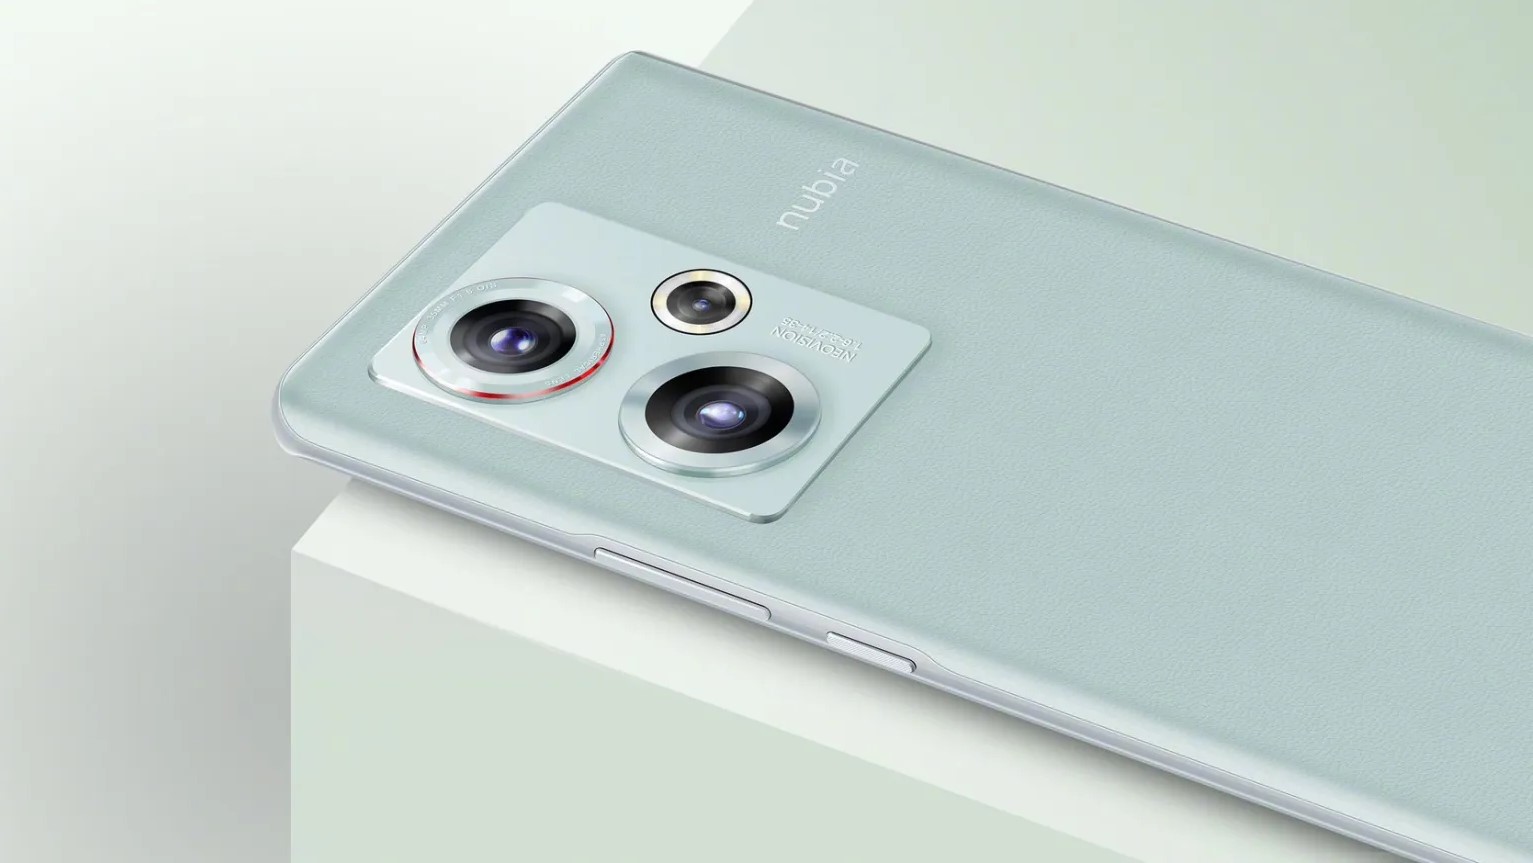 nubia Z50S Pro goes official with 35mm lens, Snapdragon 8+ Gen 2 chipset -   news